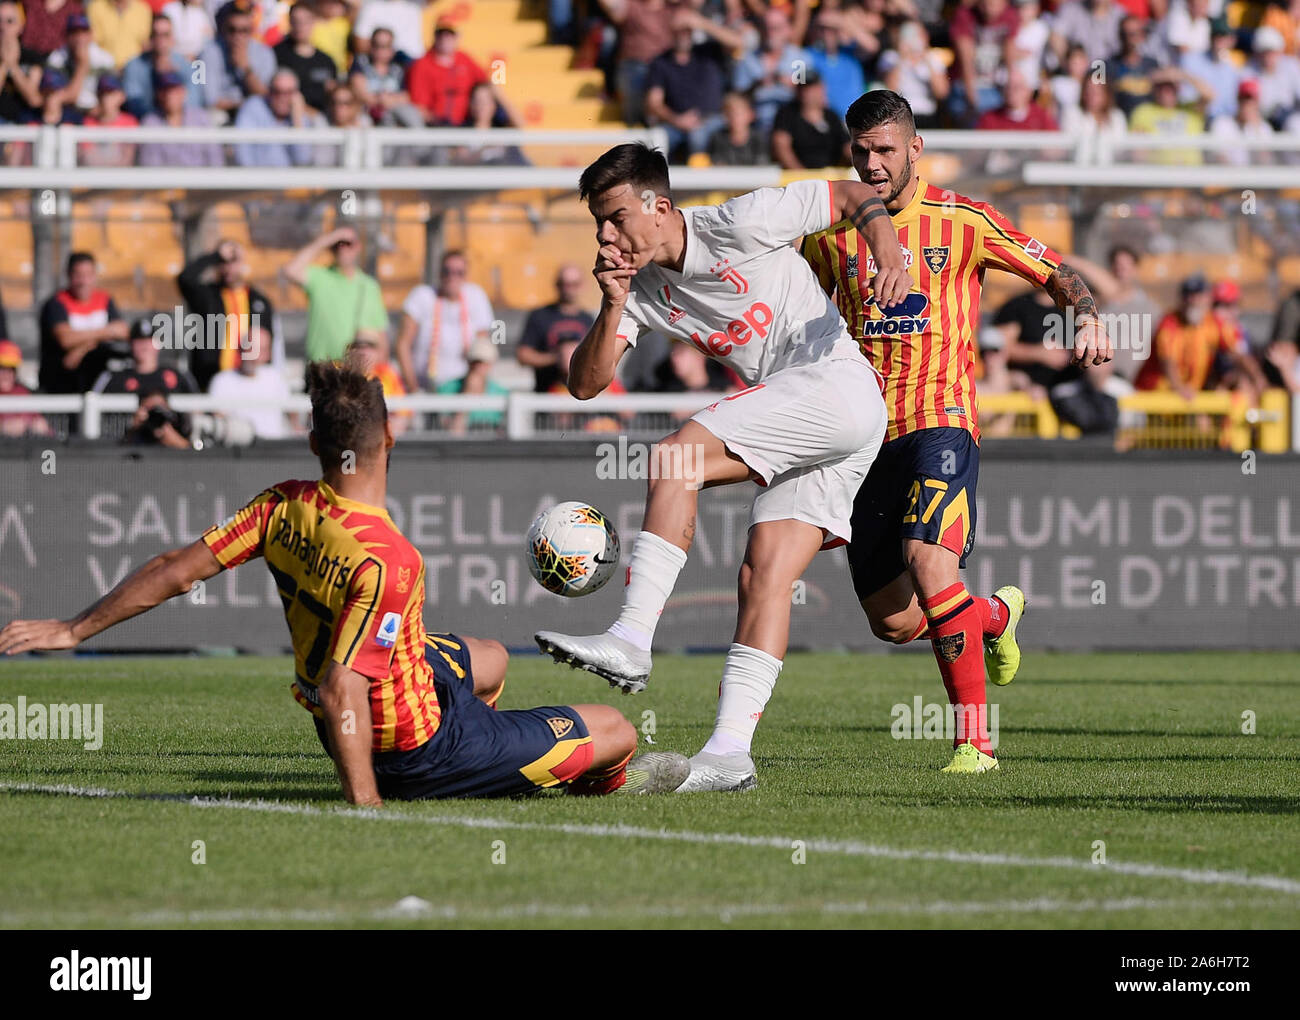 Lecce, Italy. 26th Oct, 2019. FC Juventus's Paulo Dybala (C) vies with Lecce's Panagiotis Tachtsidis (L) and Marco Calderoni during a Serie A soccer match between Lecce and FC Juventus in Lecce, Italy, Oct. 26, 2019. Credit: Federico Tardito/Xinhua/Alamy Live News Stock Photo